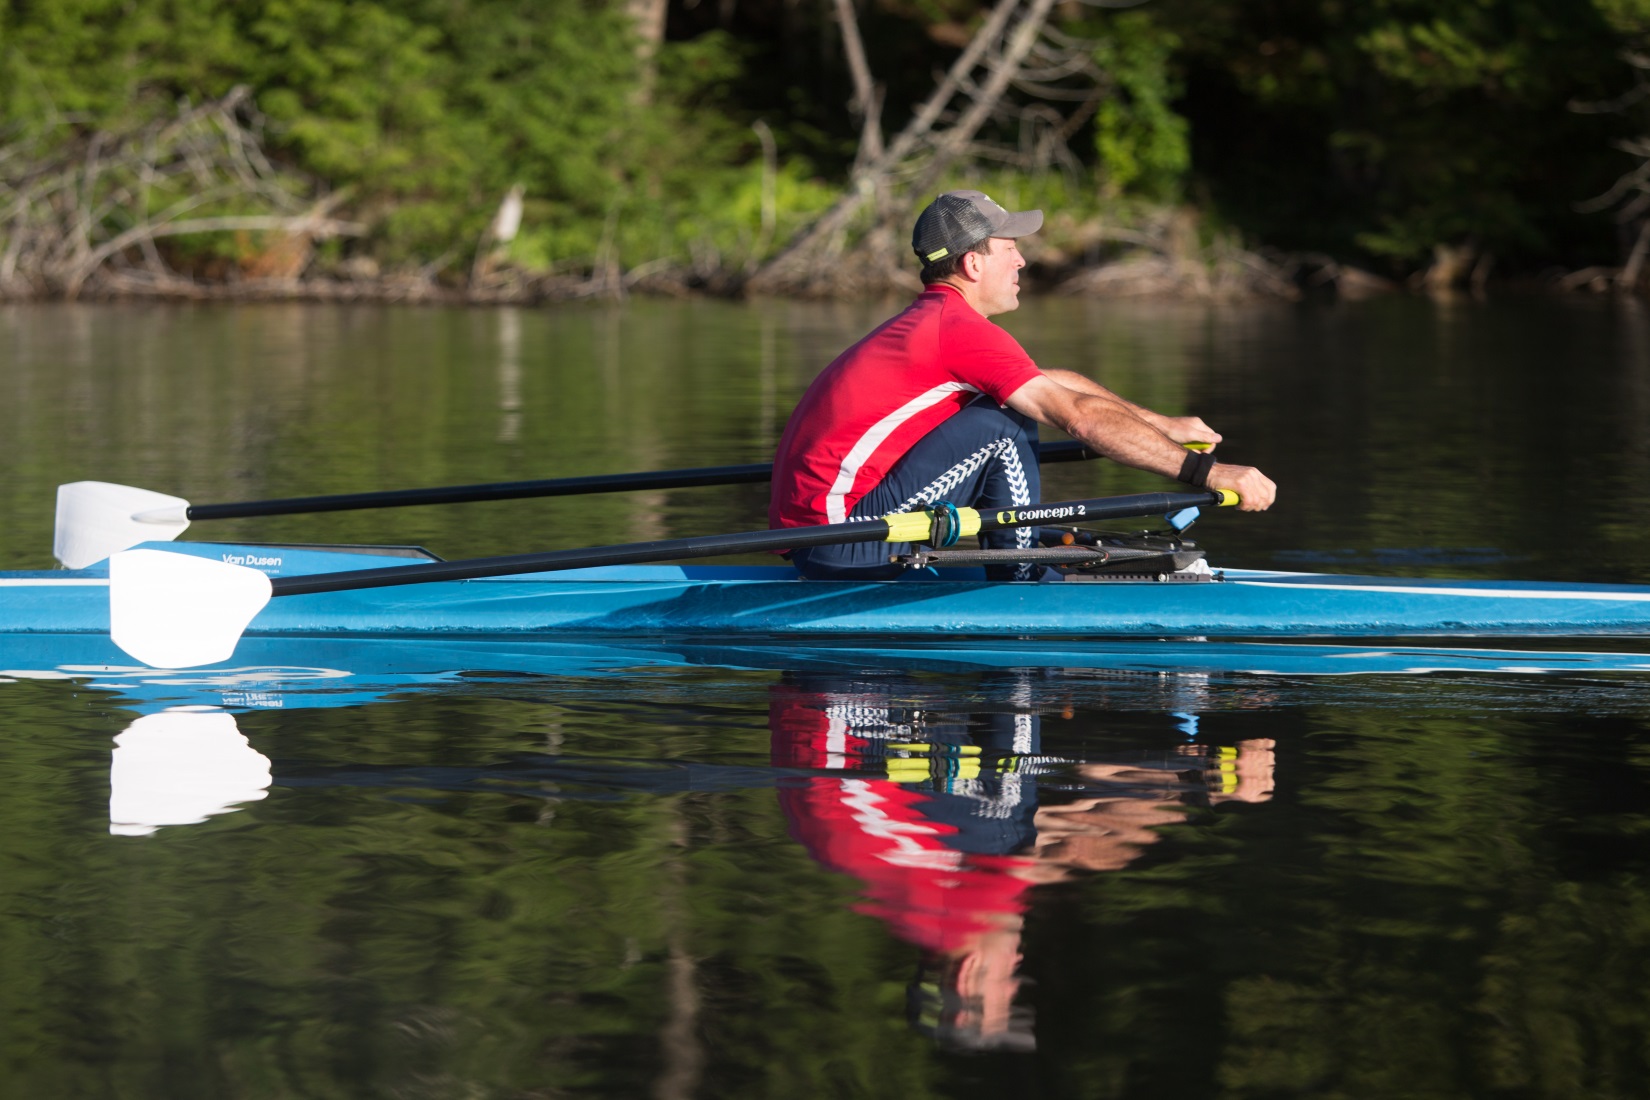 Concept2 launches the new Compact blade on the Bantam scull. The Bantam is a lower-priced scull with additional durability that maintains high performance.